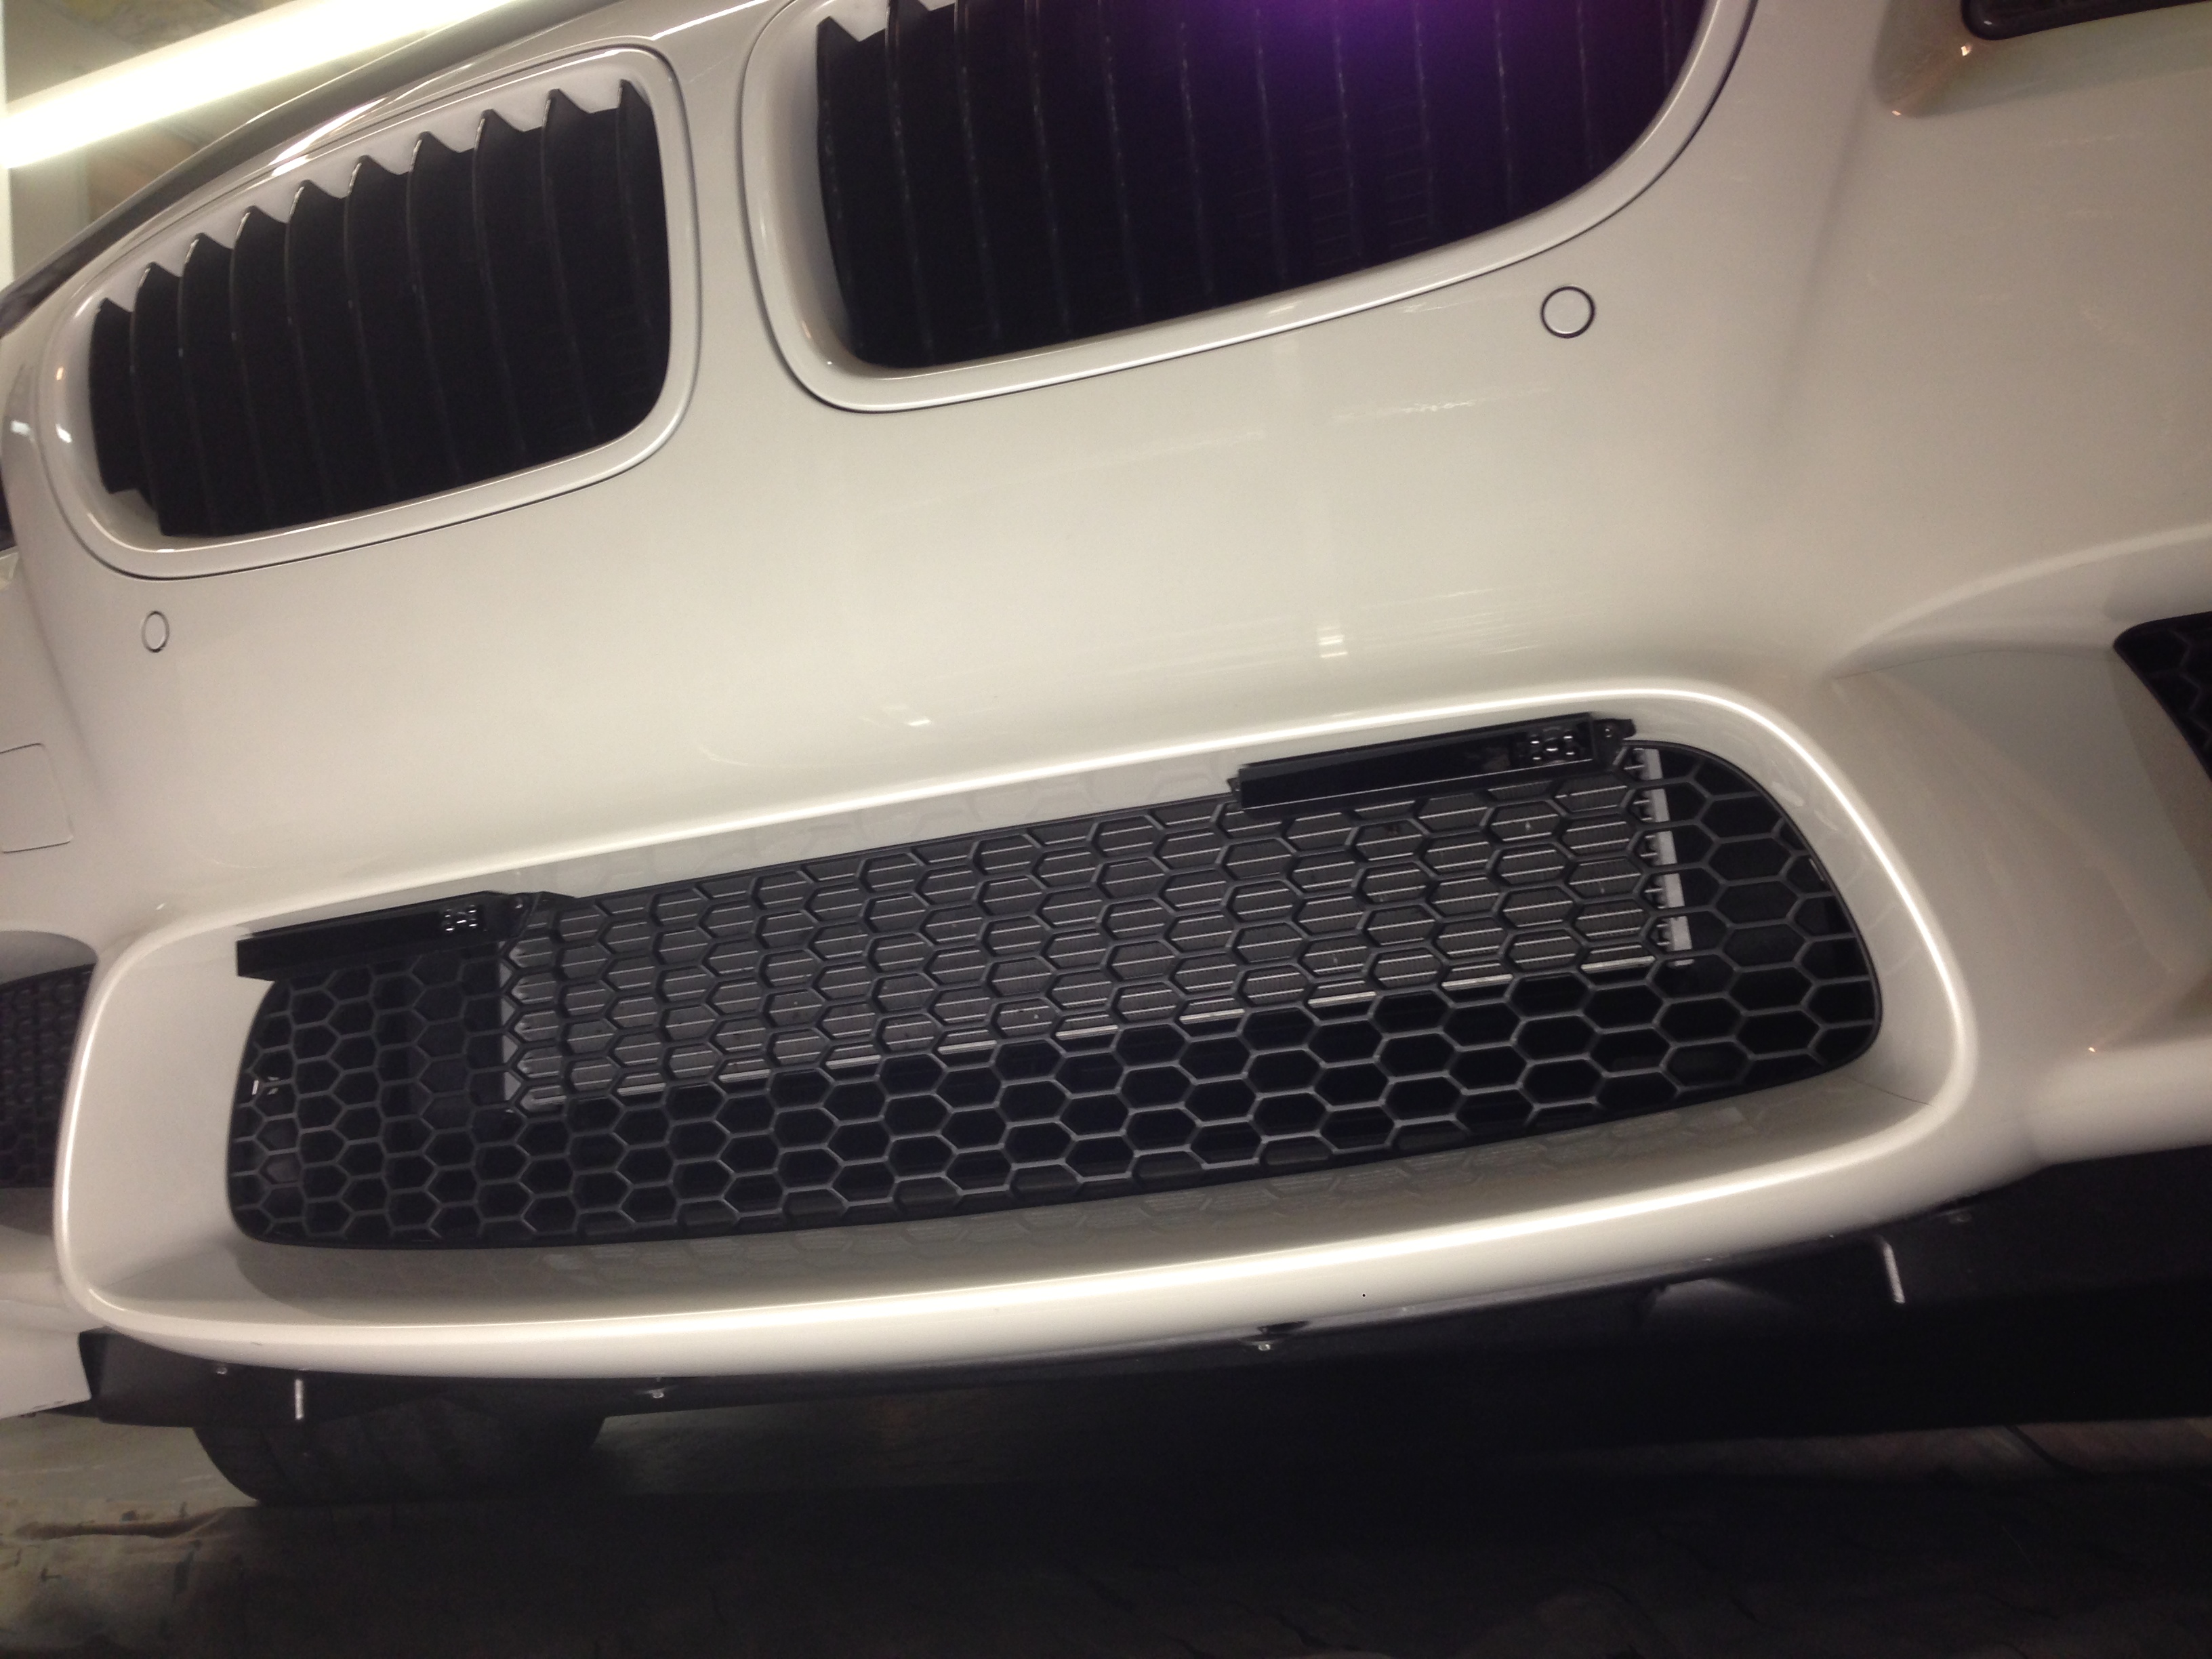 Custom K40 Police Laser Jammers Installed on 2013 BMW M5 in Allston, MA